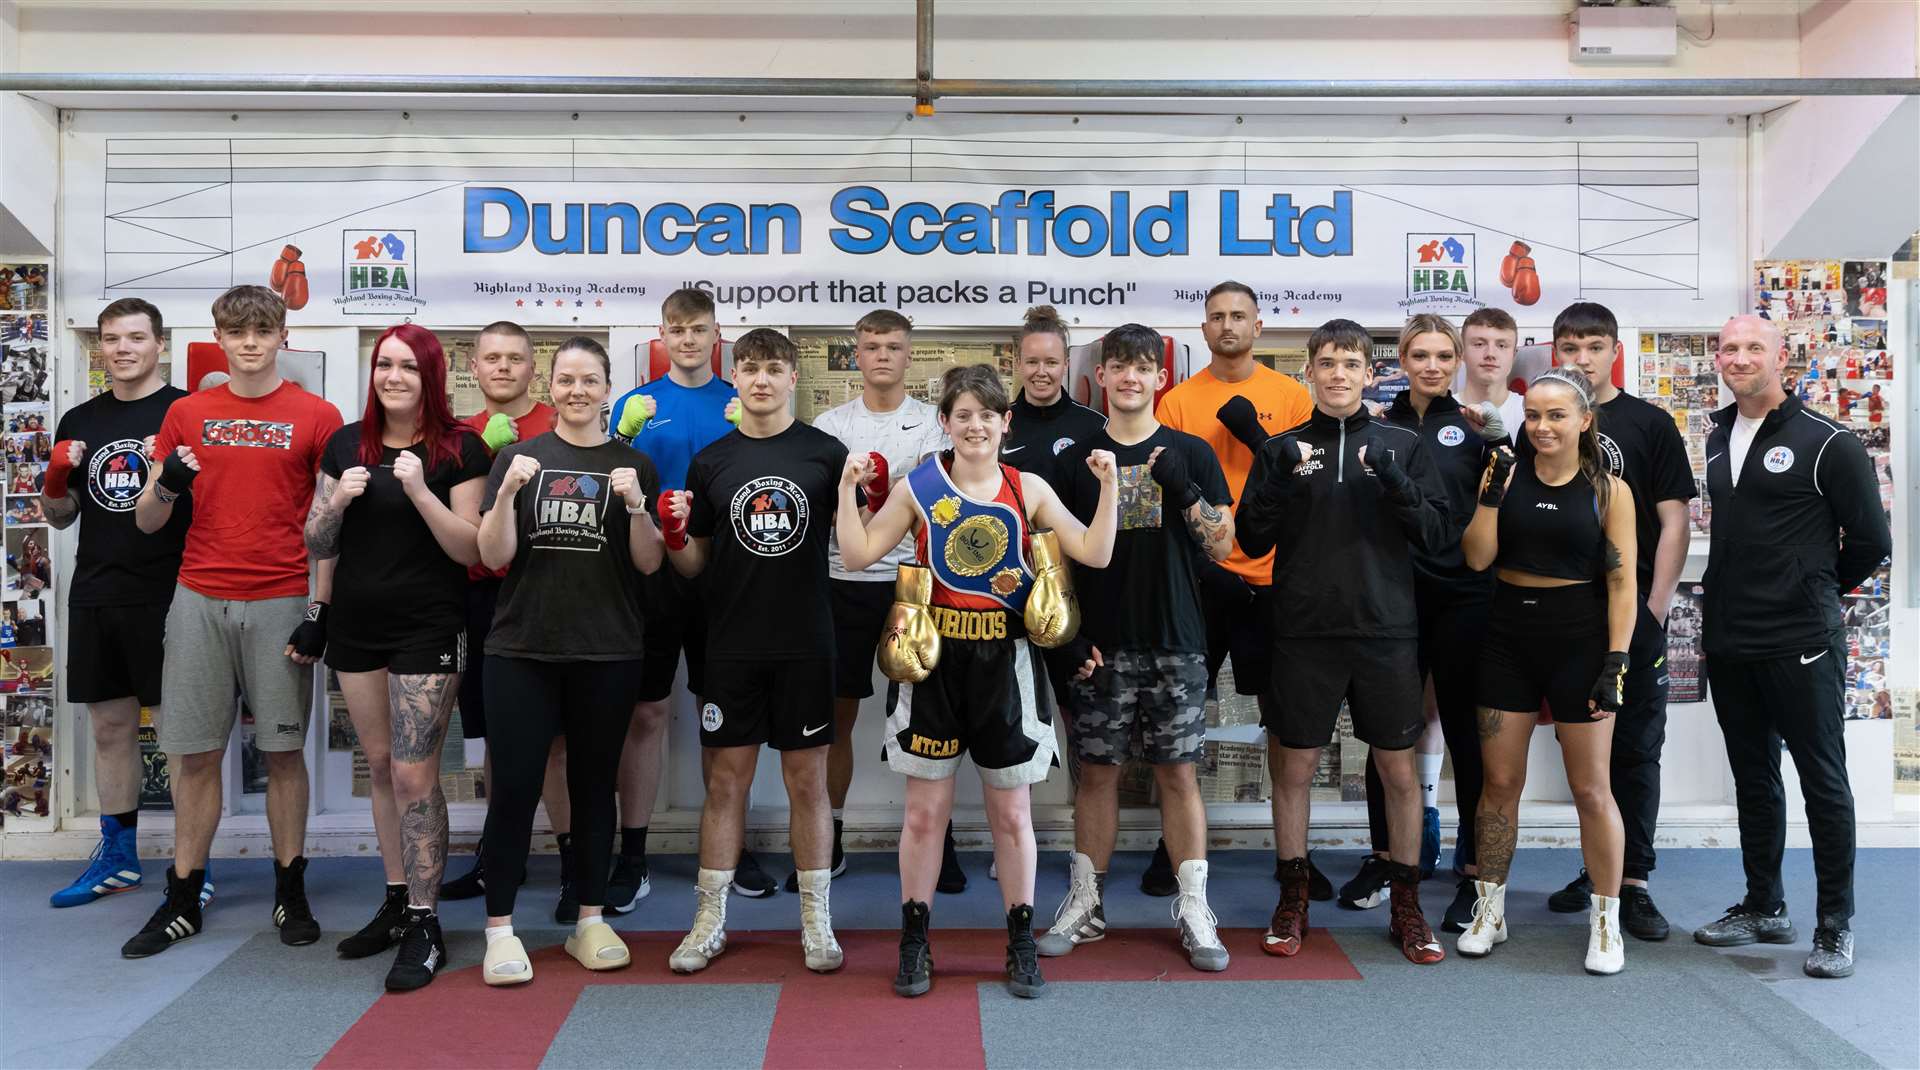 Lindsay Fulton credits her Highland Boxing Academy teammates with helping her hit new heights in the sport. Picture: David Rothnie